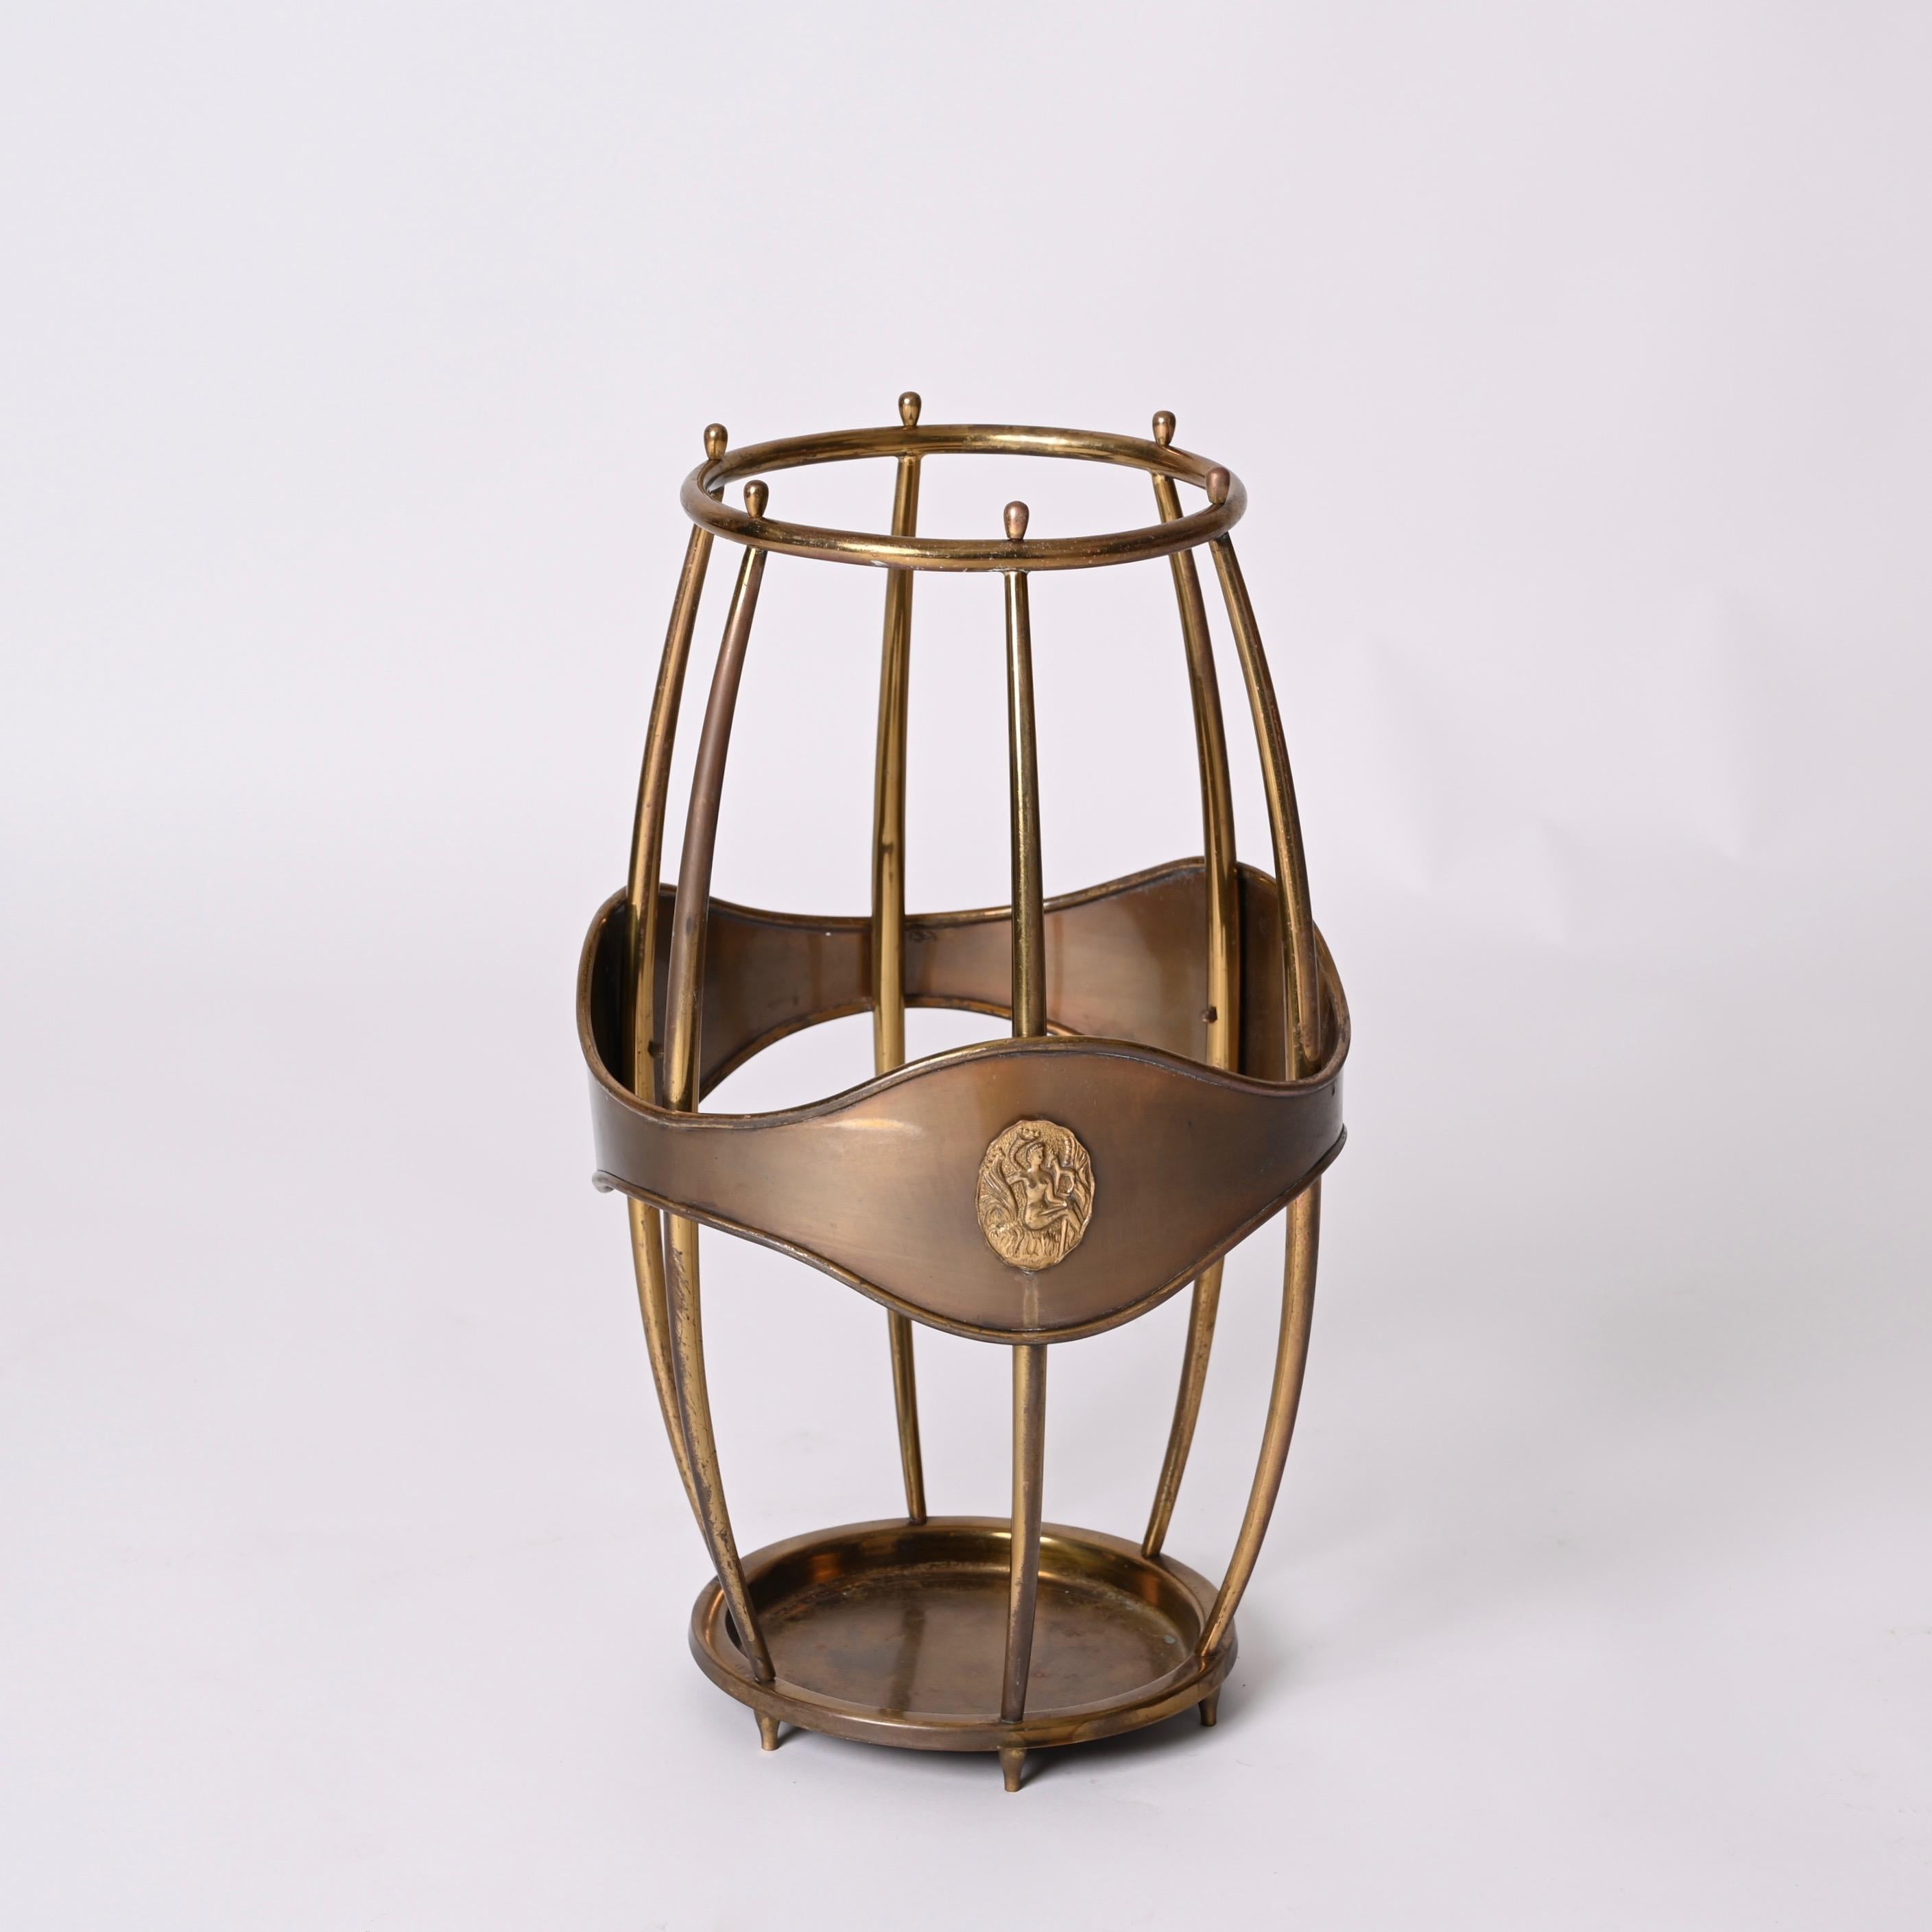 Midcentury Italian Brass Barrell-Shaped Umbrella Stand and Cane Holder, 1950s For Sale 8